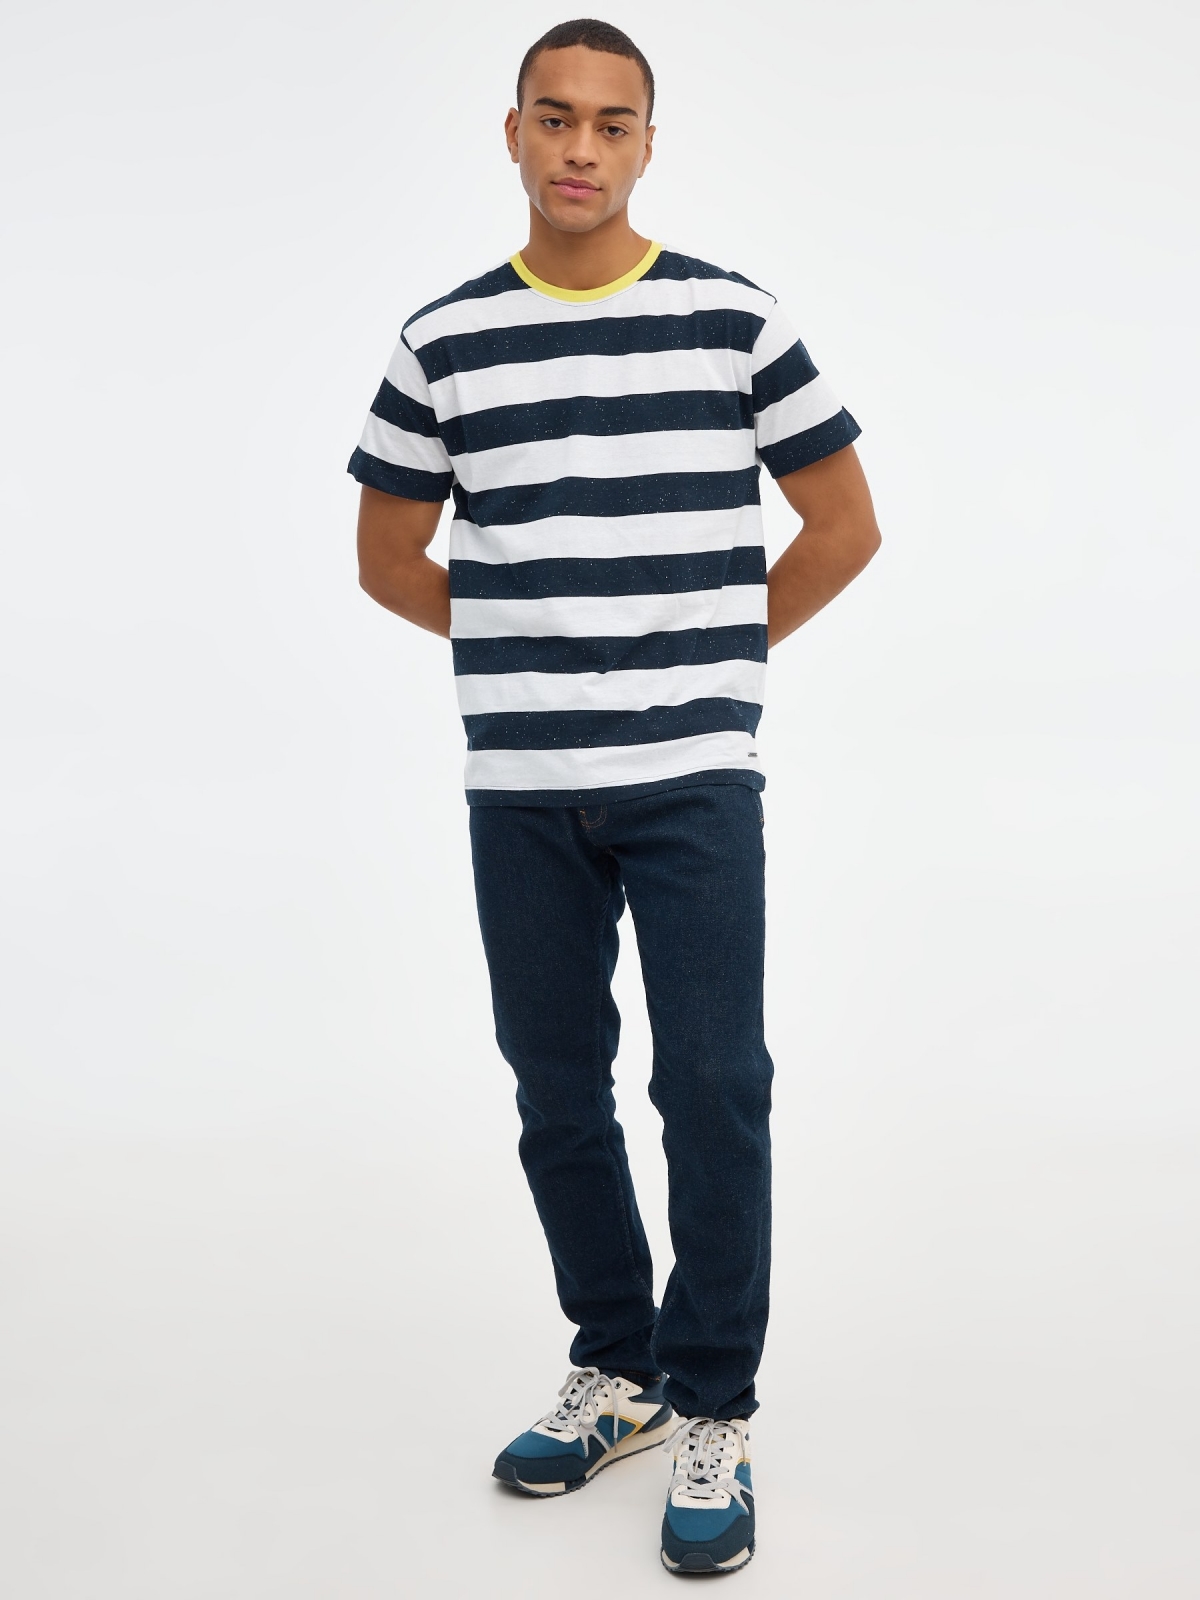 Striped T-shirt with collar navy front view